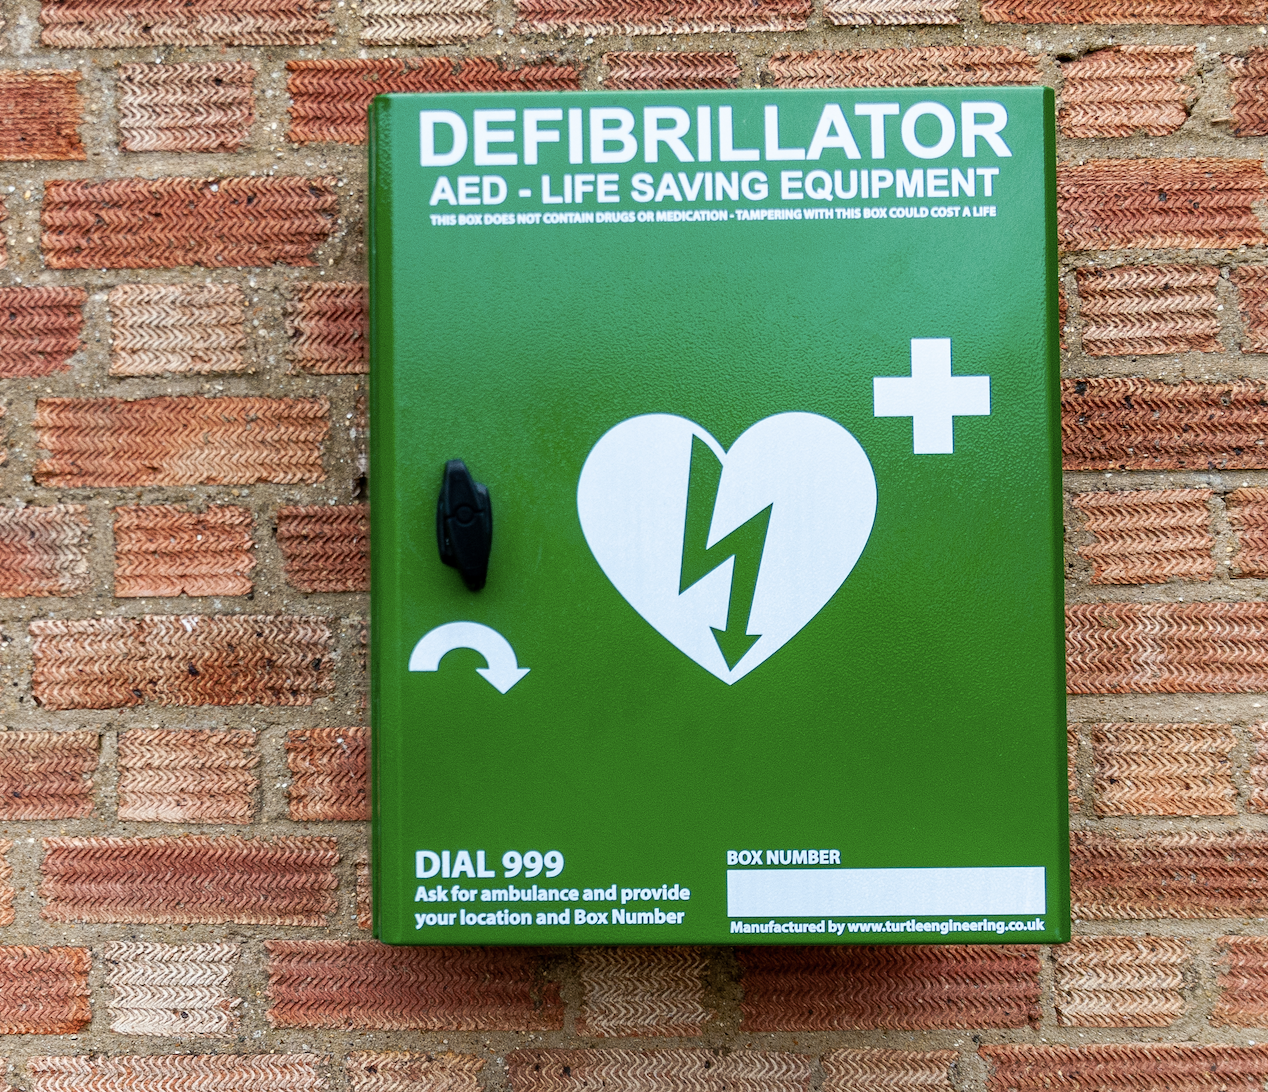 Image for The rollout of 20,000 defibrillators to schools up and down the country